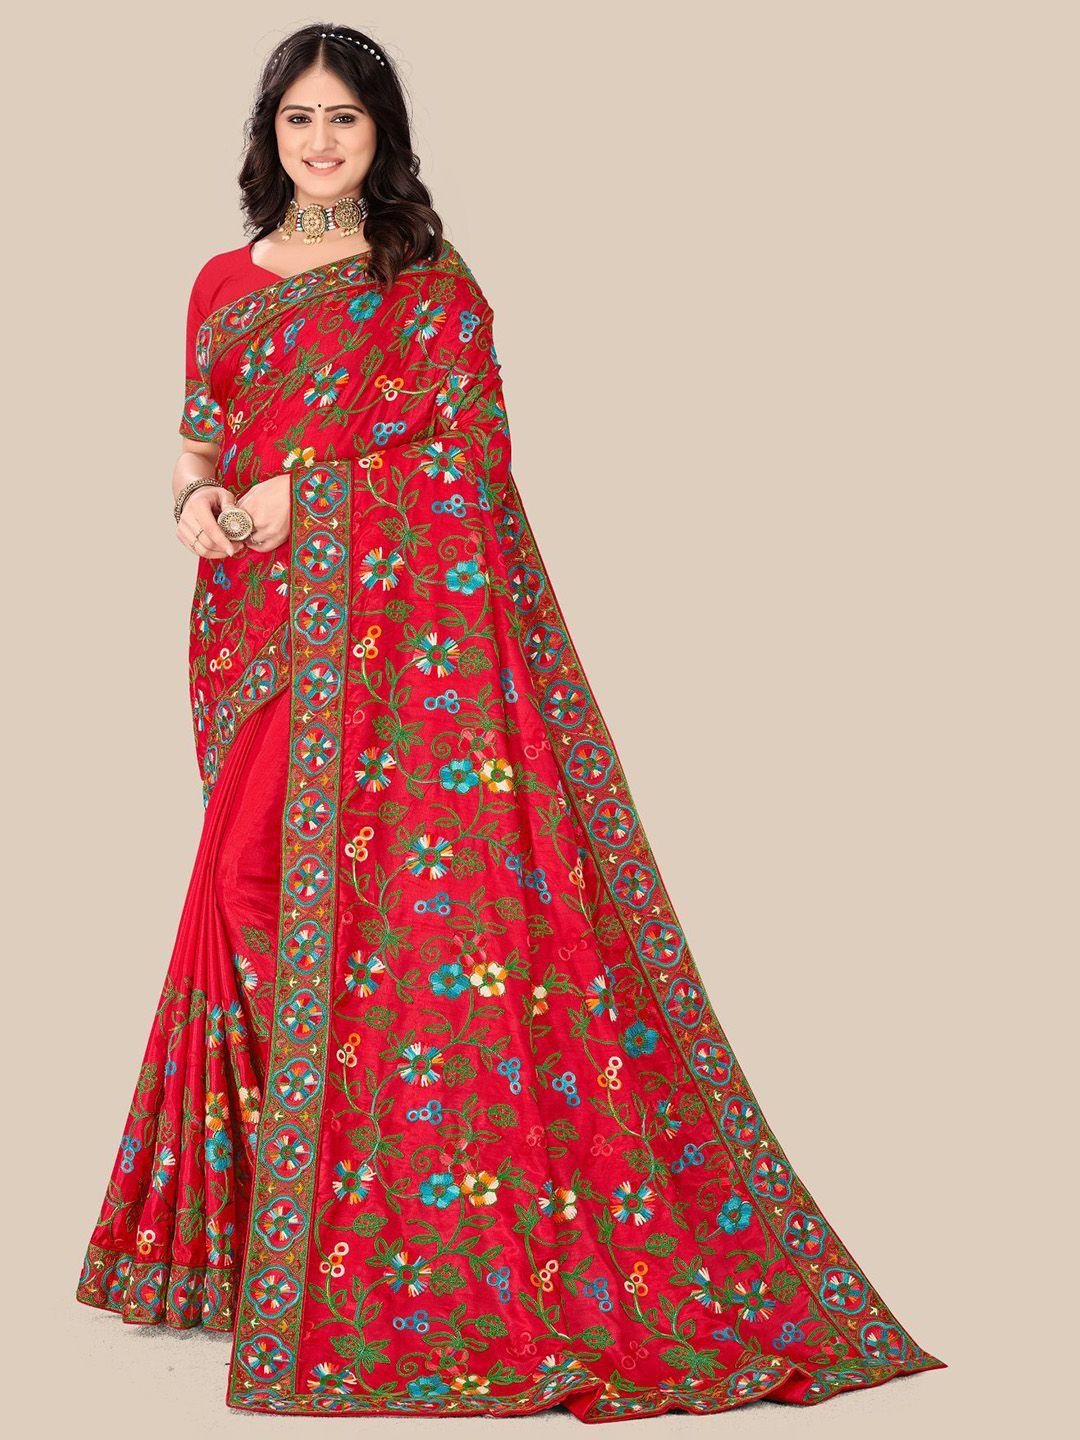 vairagee red & green floral embroidered saree